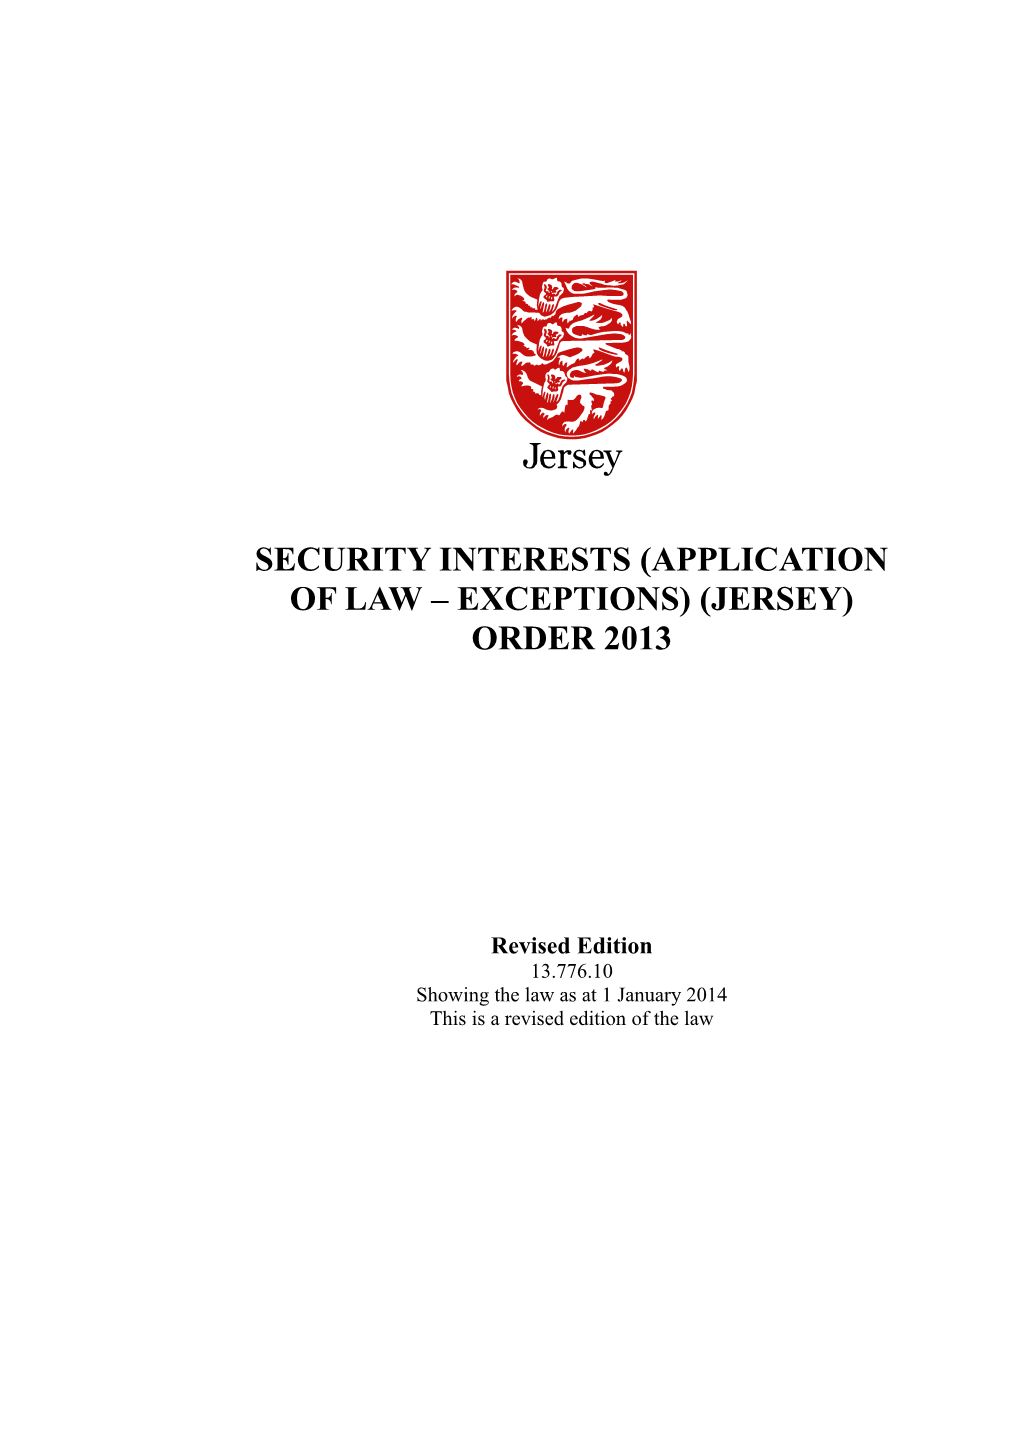 Revised Edition - Showing the Law at 1 January 2014 - Security Interests (Application Of